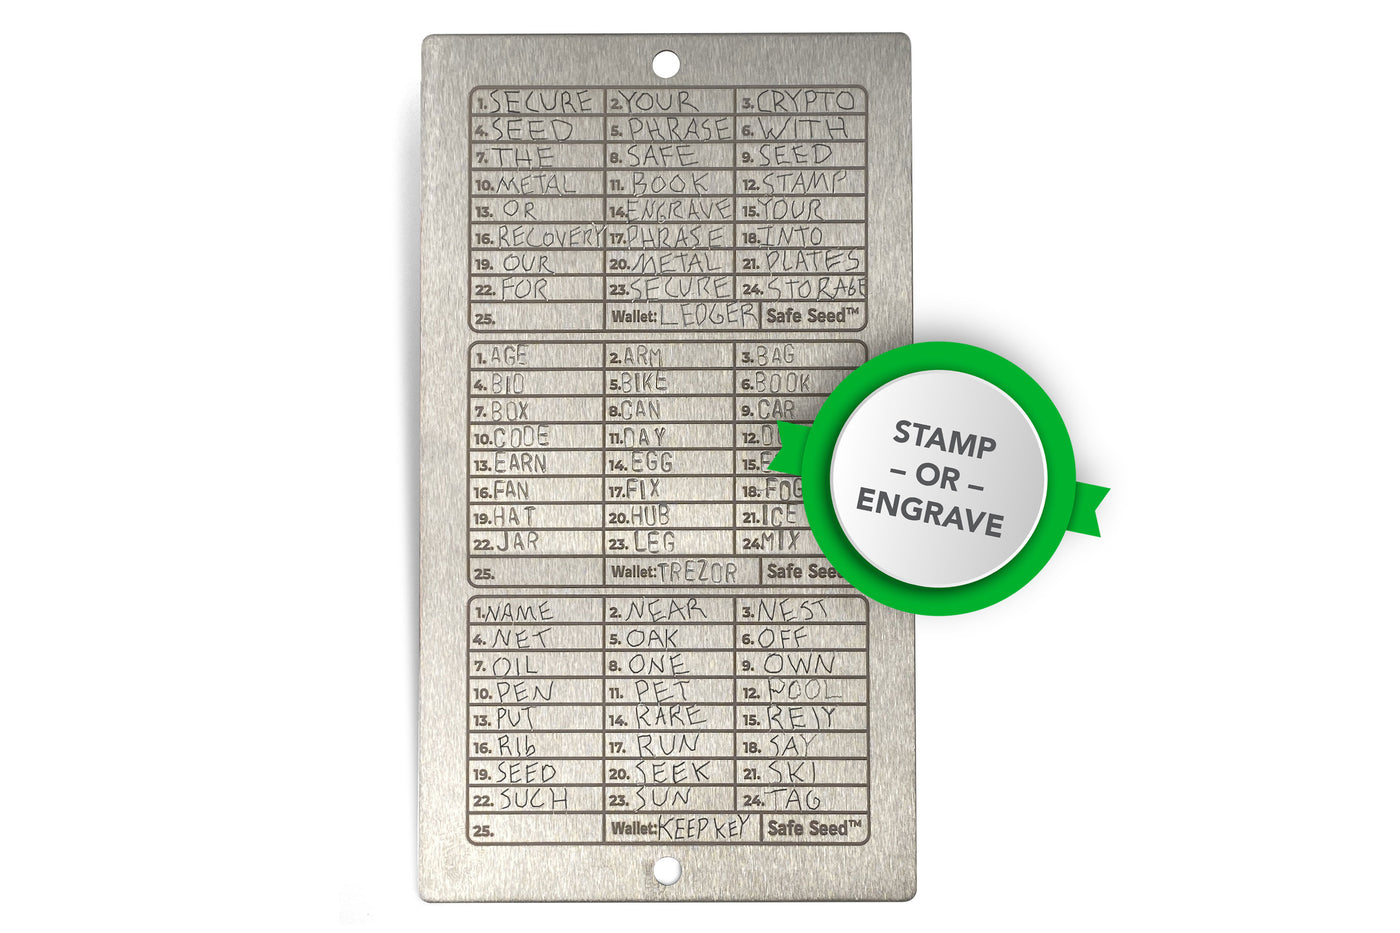 Safe Seed Crypto Recovery Passphrase Metal Book Titanium Edition W/ Stamp Kit & Bench Block